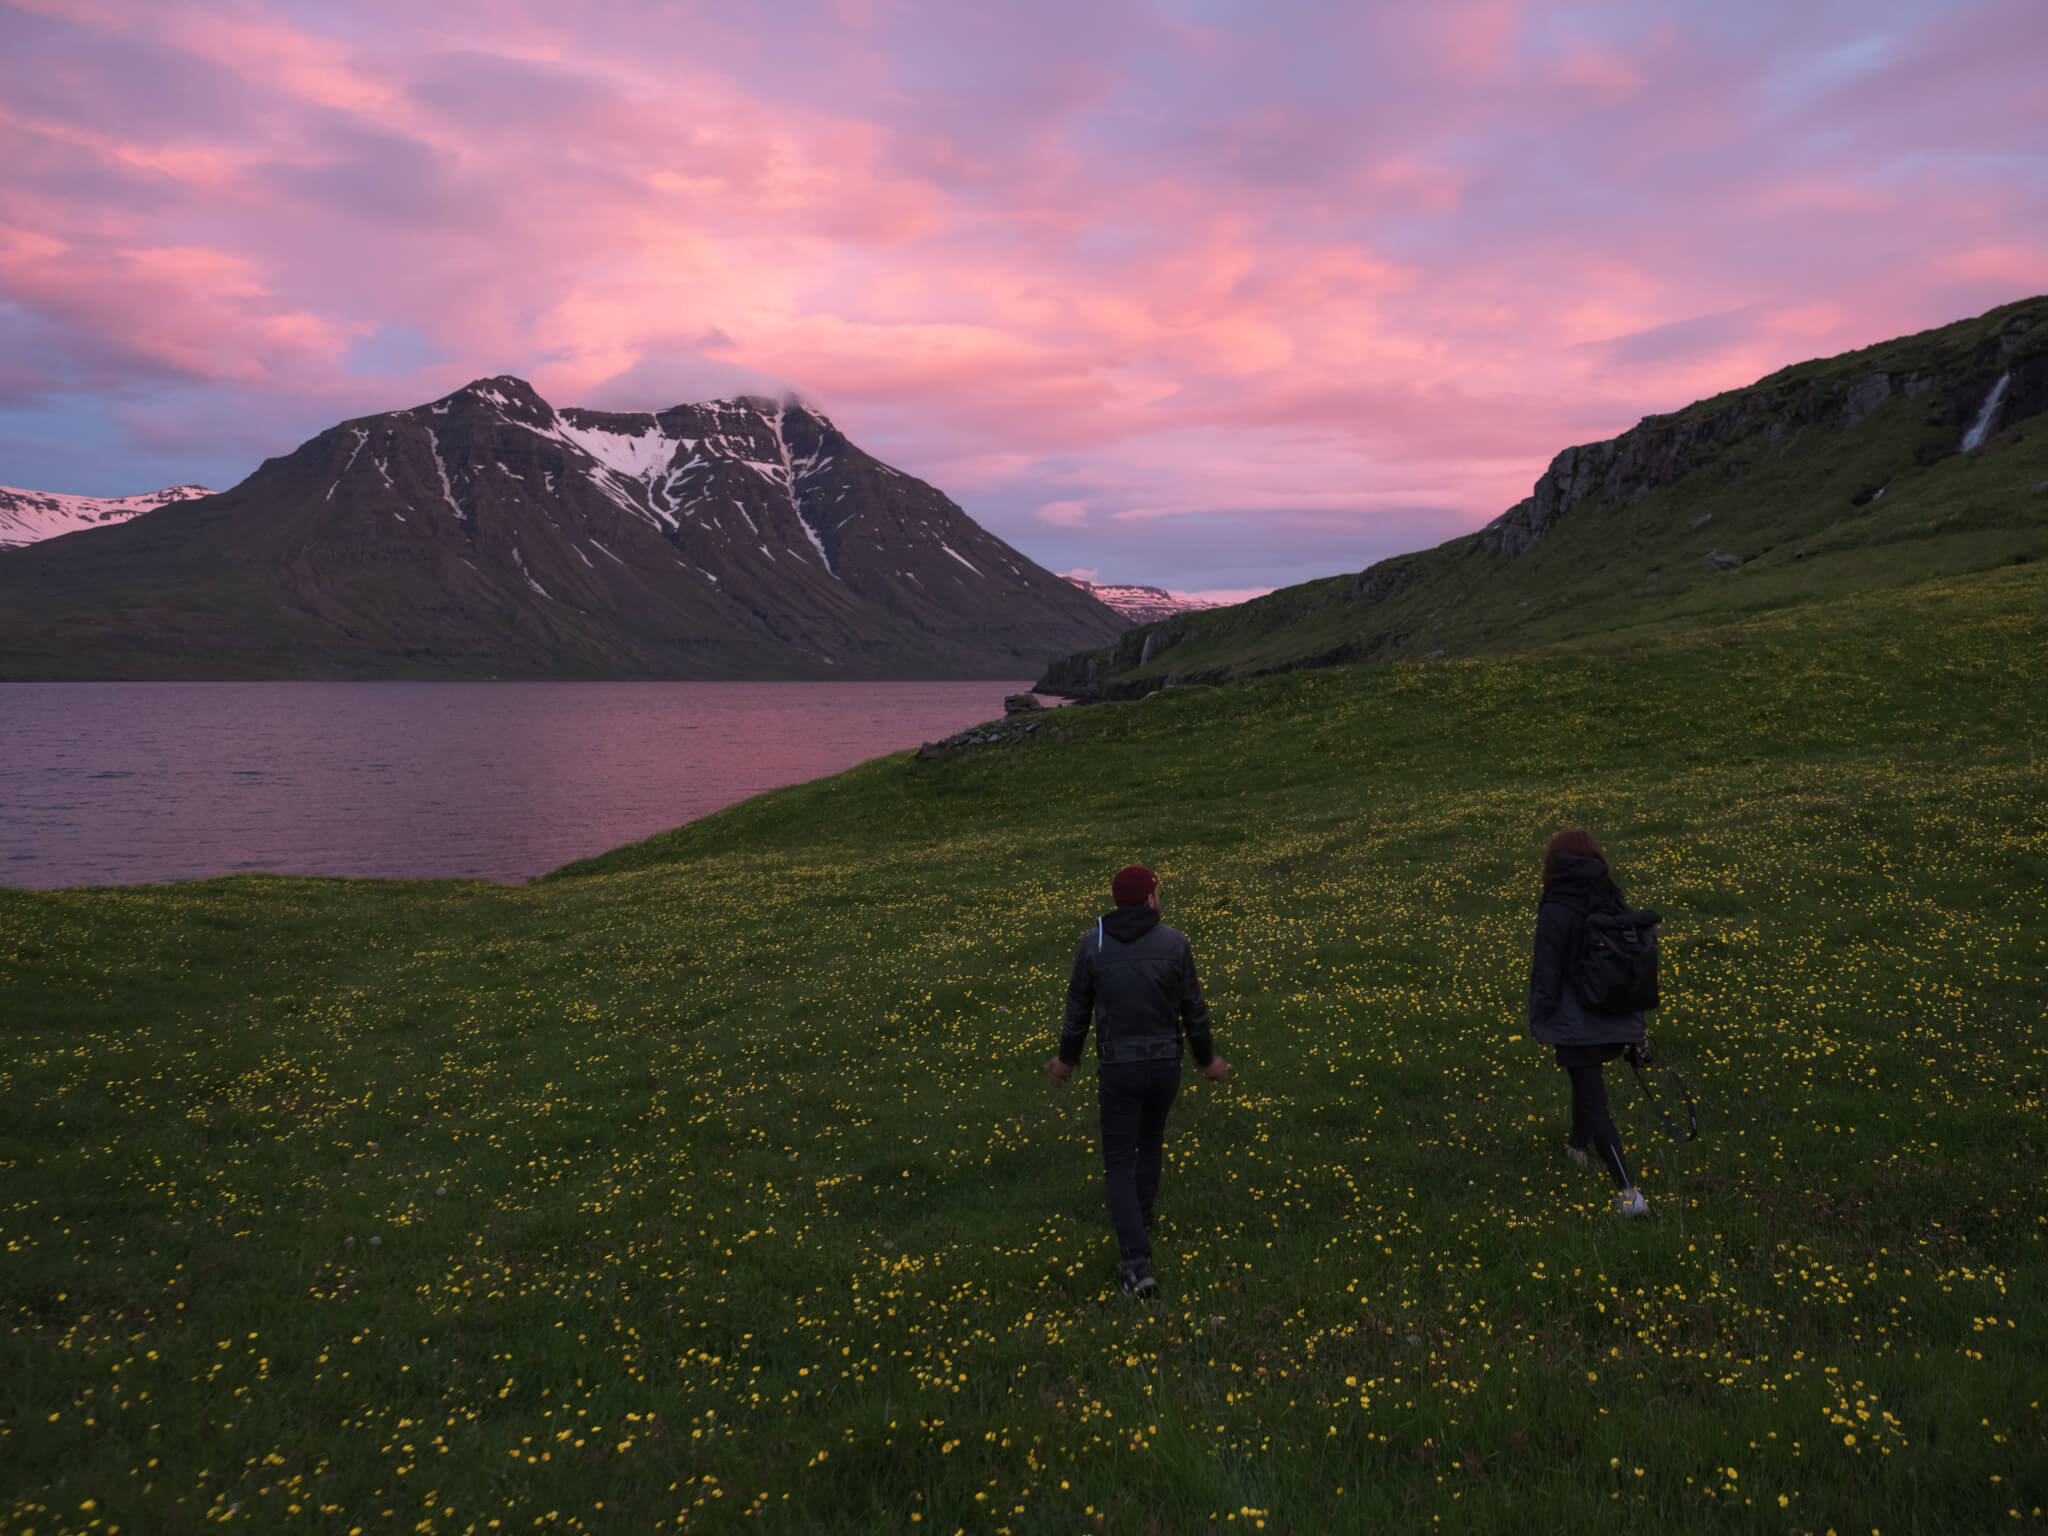 Couple walking on grassy hill near fjord in evening